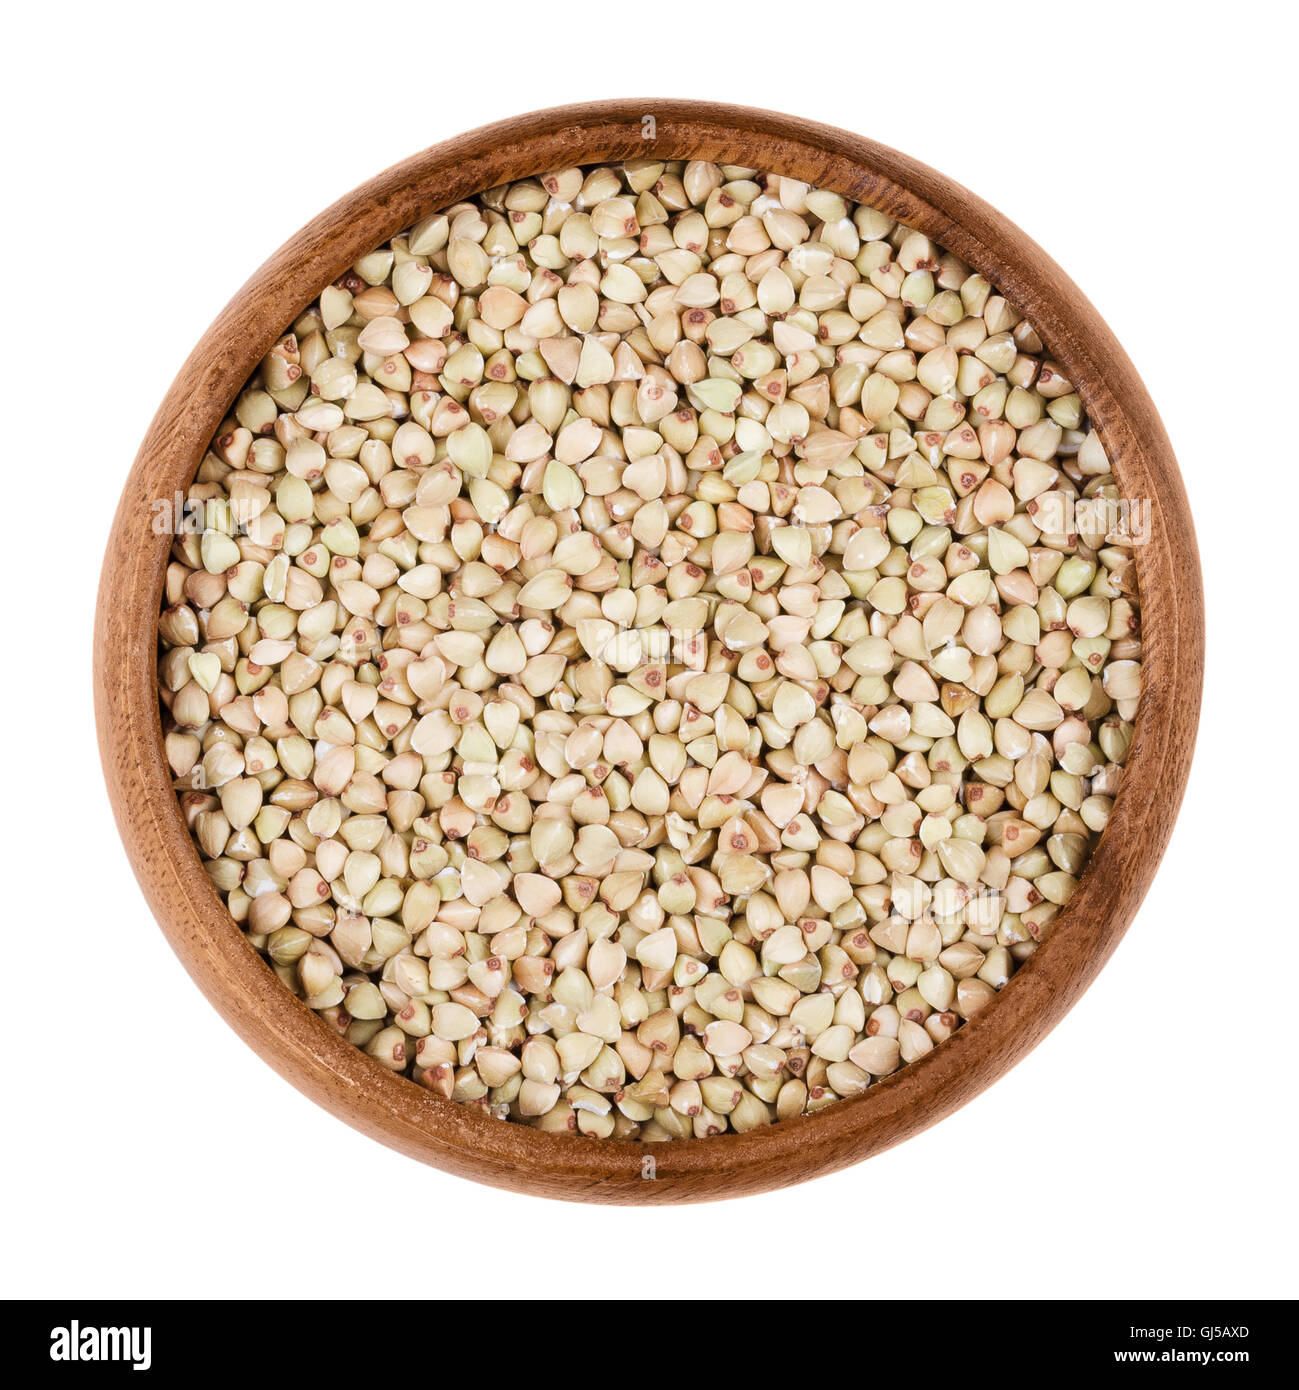 Buckwheat in a wooden bowl on white background. Small grain seeds of Fagopyrum esculentum. Edible, raw and organic food. Stock Photo